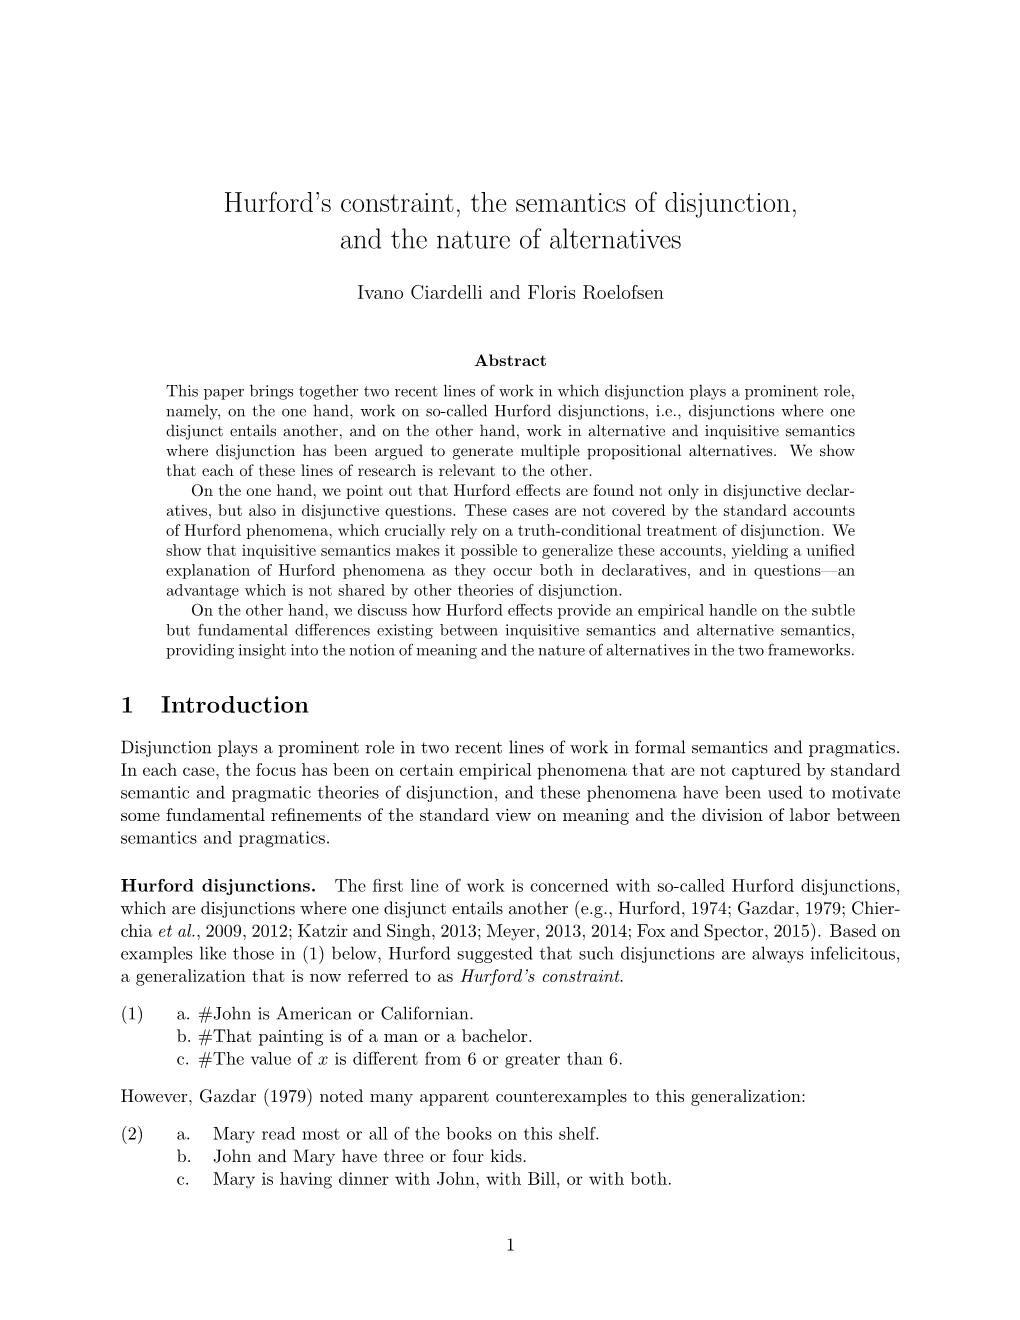 Hurford's Constraint, the Semantics of Disjunction, and The